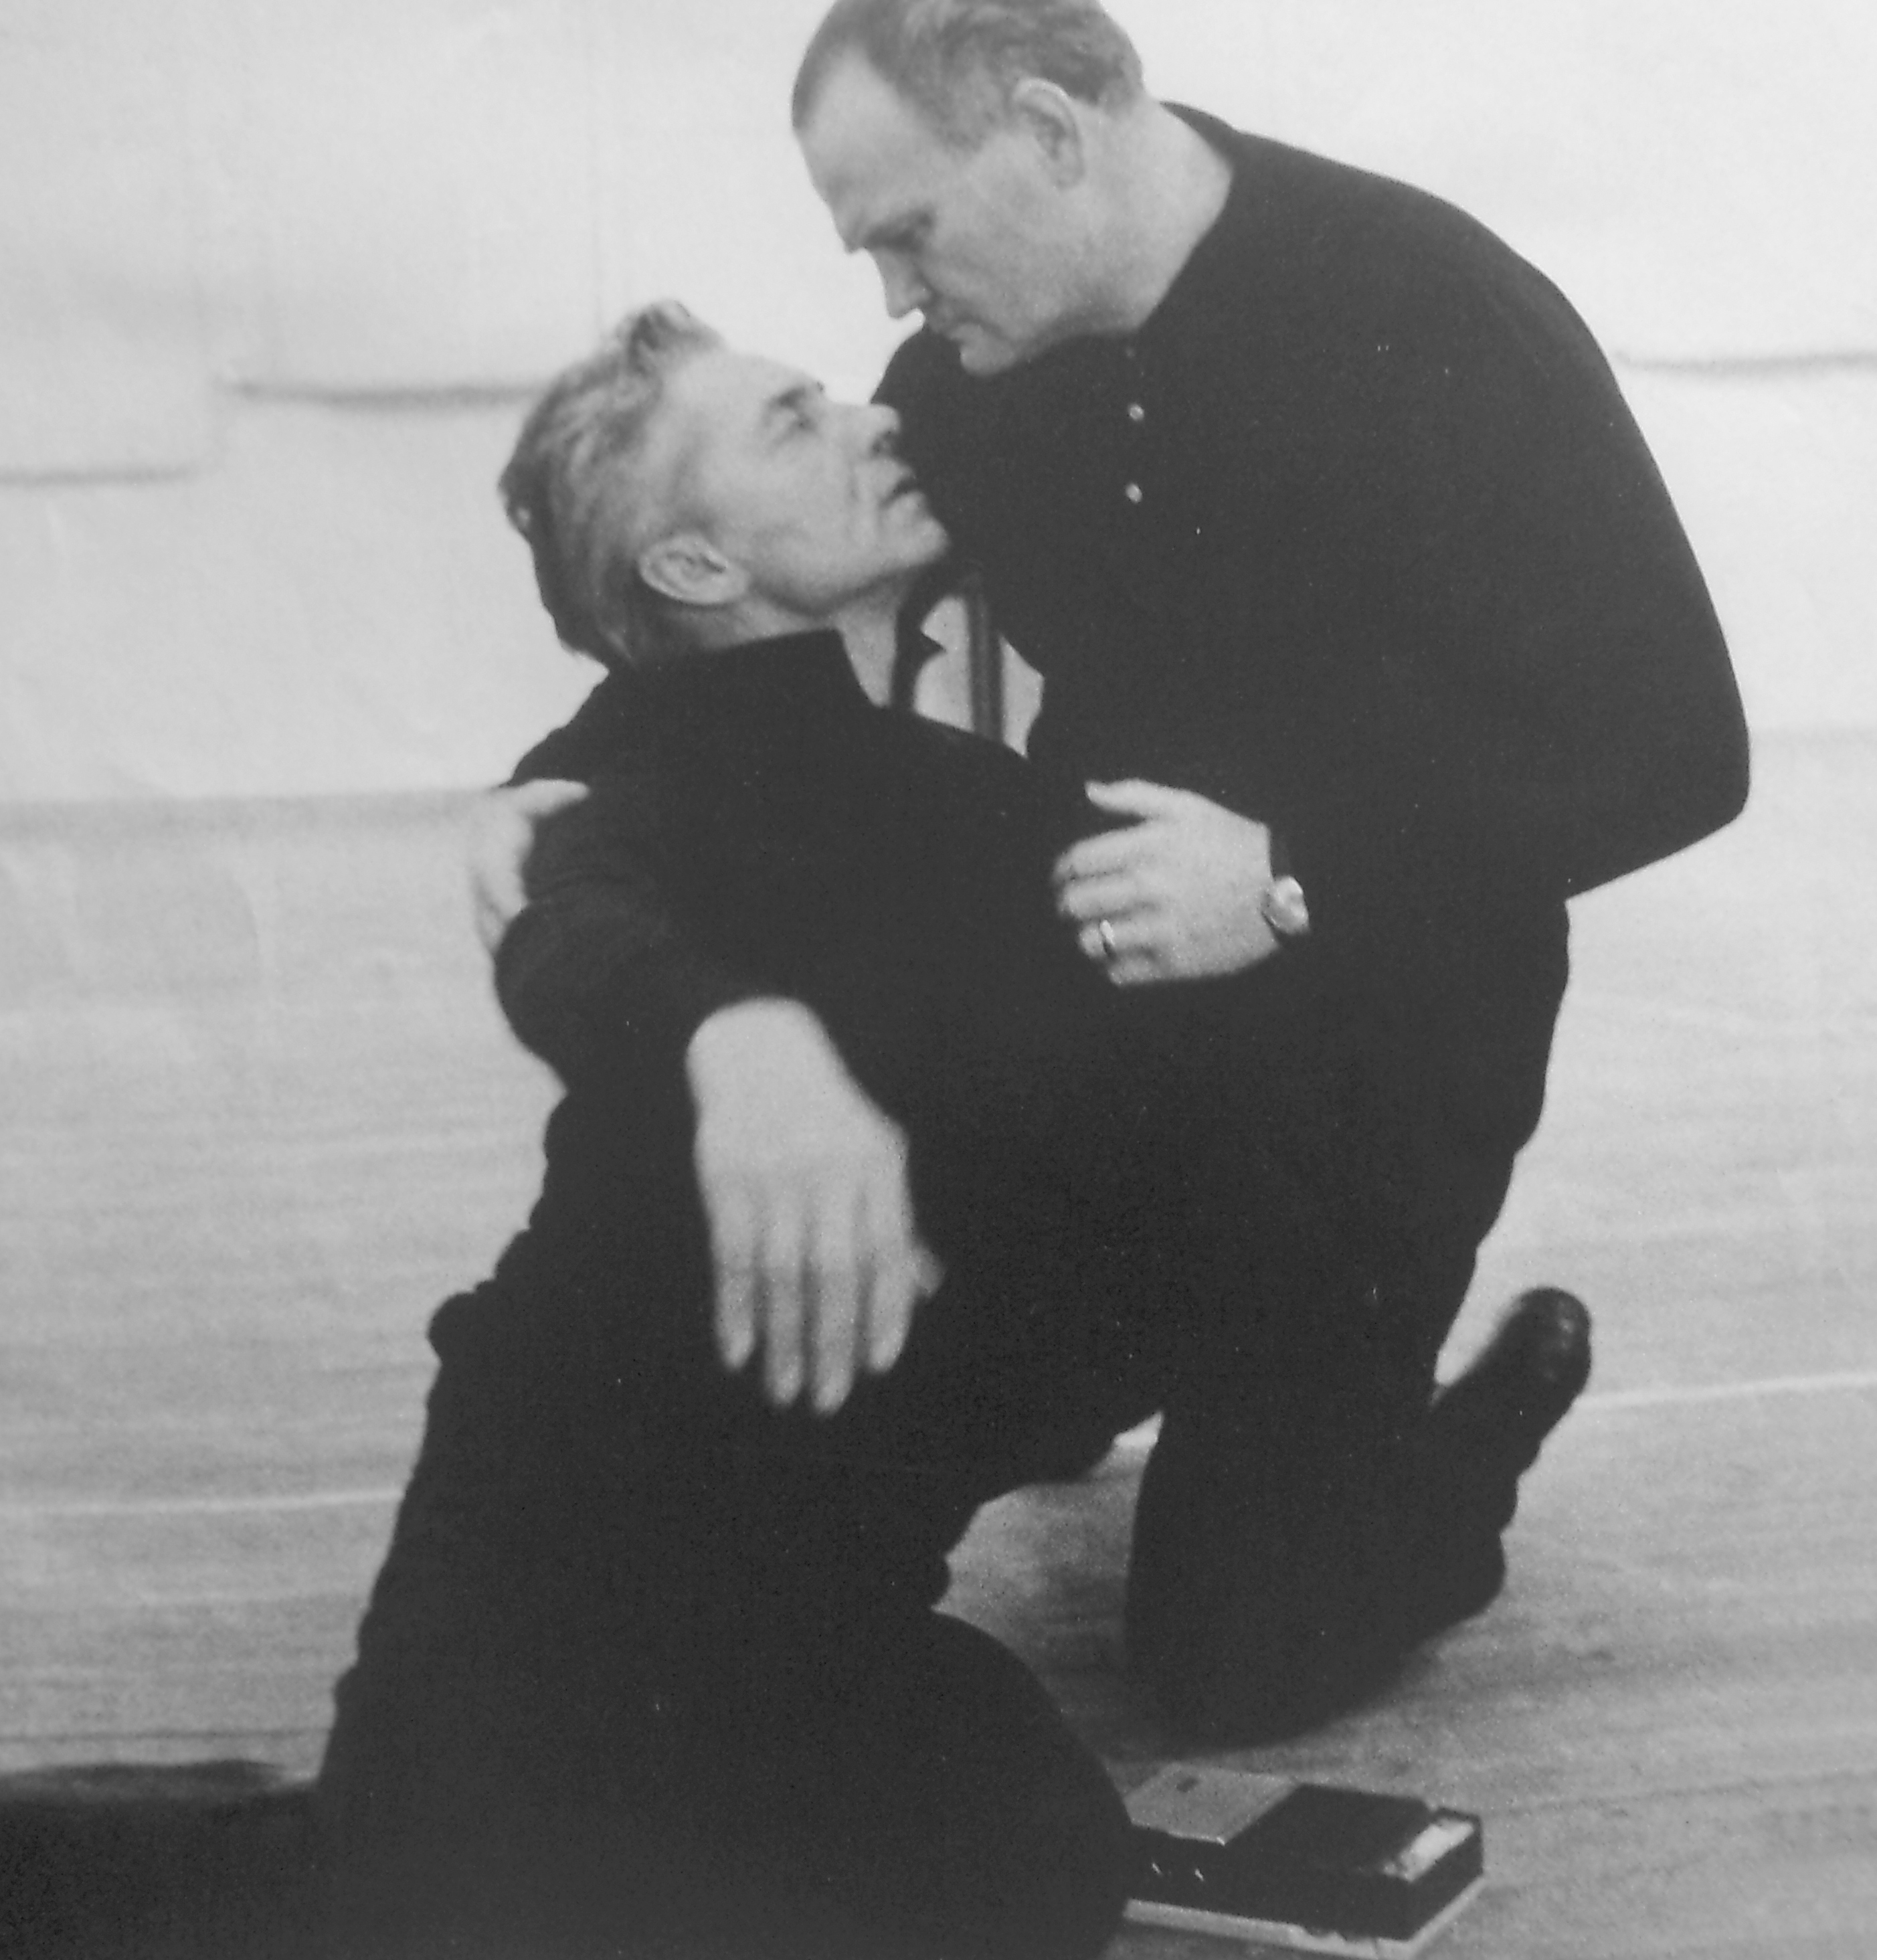 Vickers and Karajan in rehearsal for Wagner's Ring